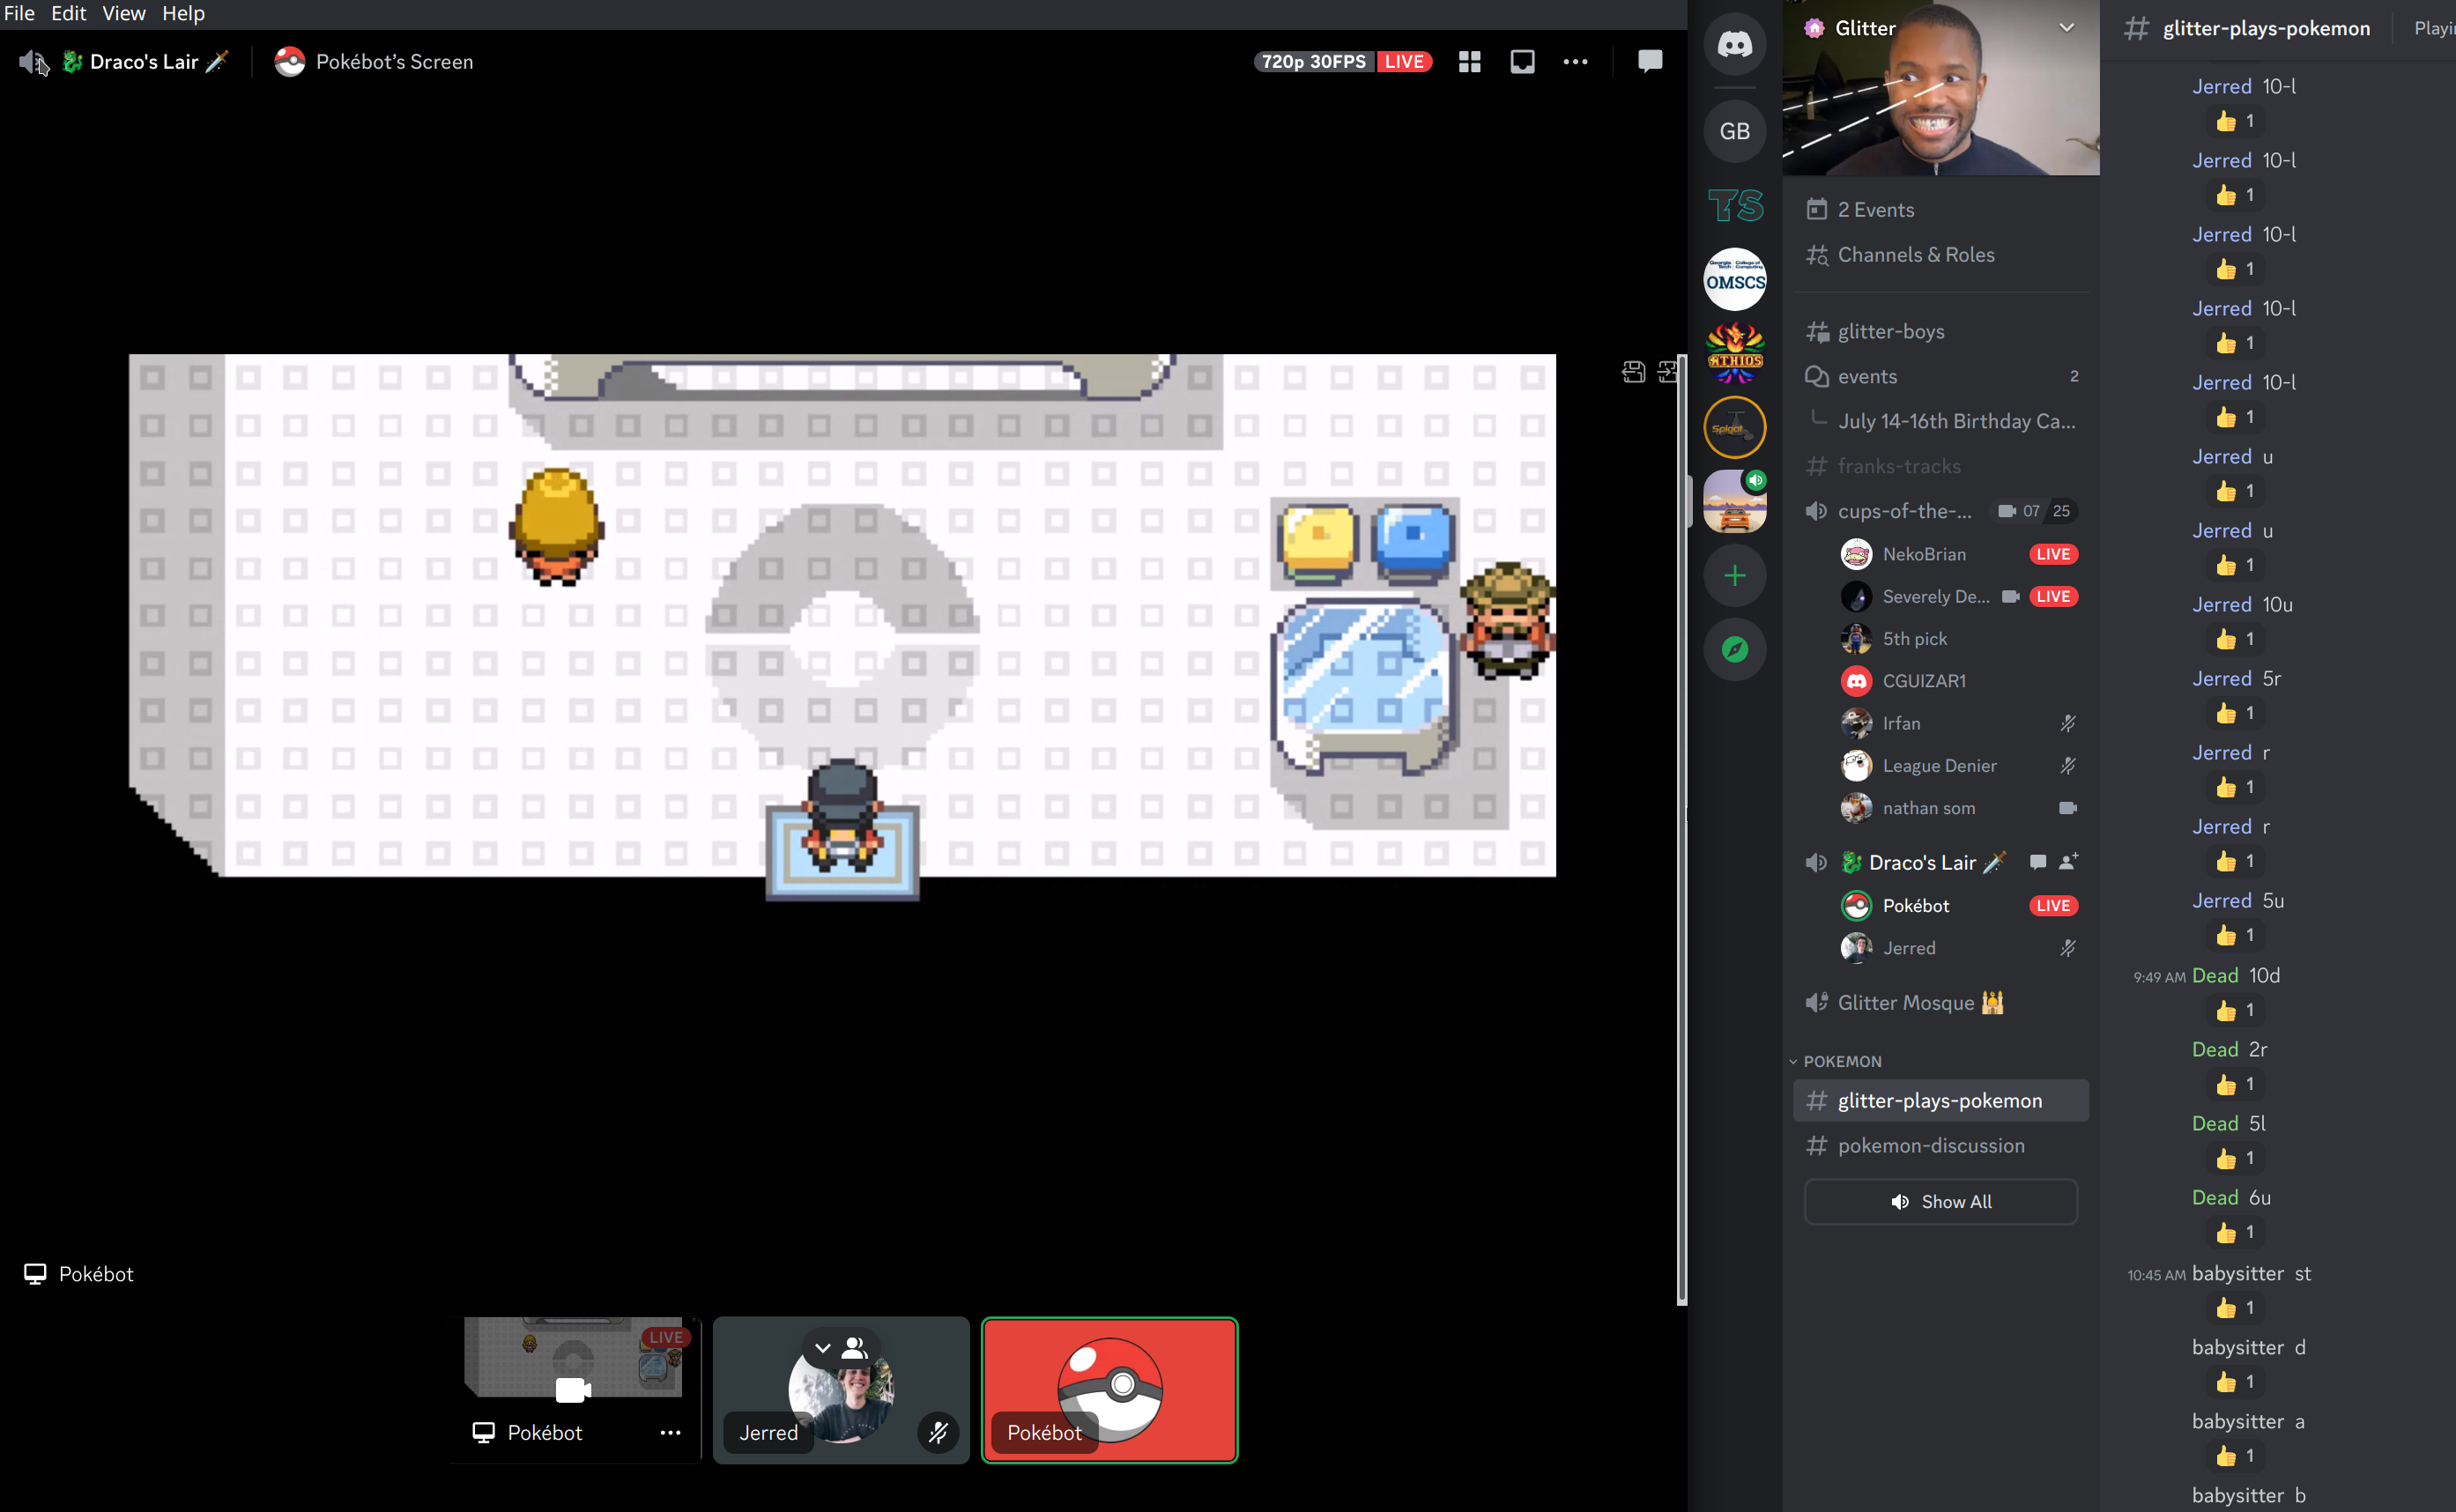 A screenshot of a desktop. The window on the left shows a video stream of Pokémon Liquid Crystal produced by this application. The window on the right shows the Discord application with a user named Pokebot in a voice channel. Discord is also displaying a text channel where users can enter commands to control the Pokémon bot